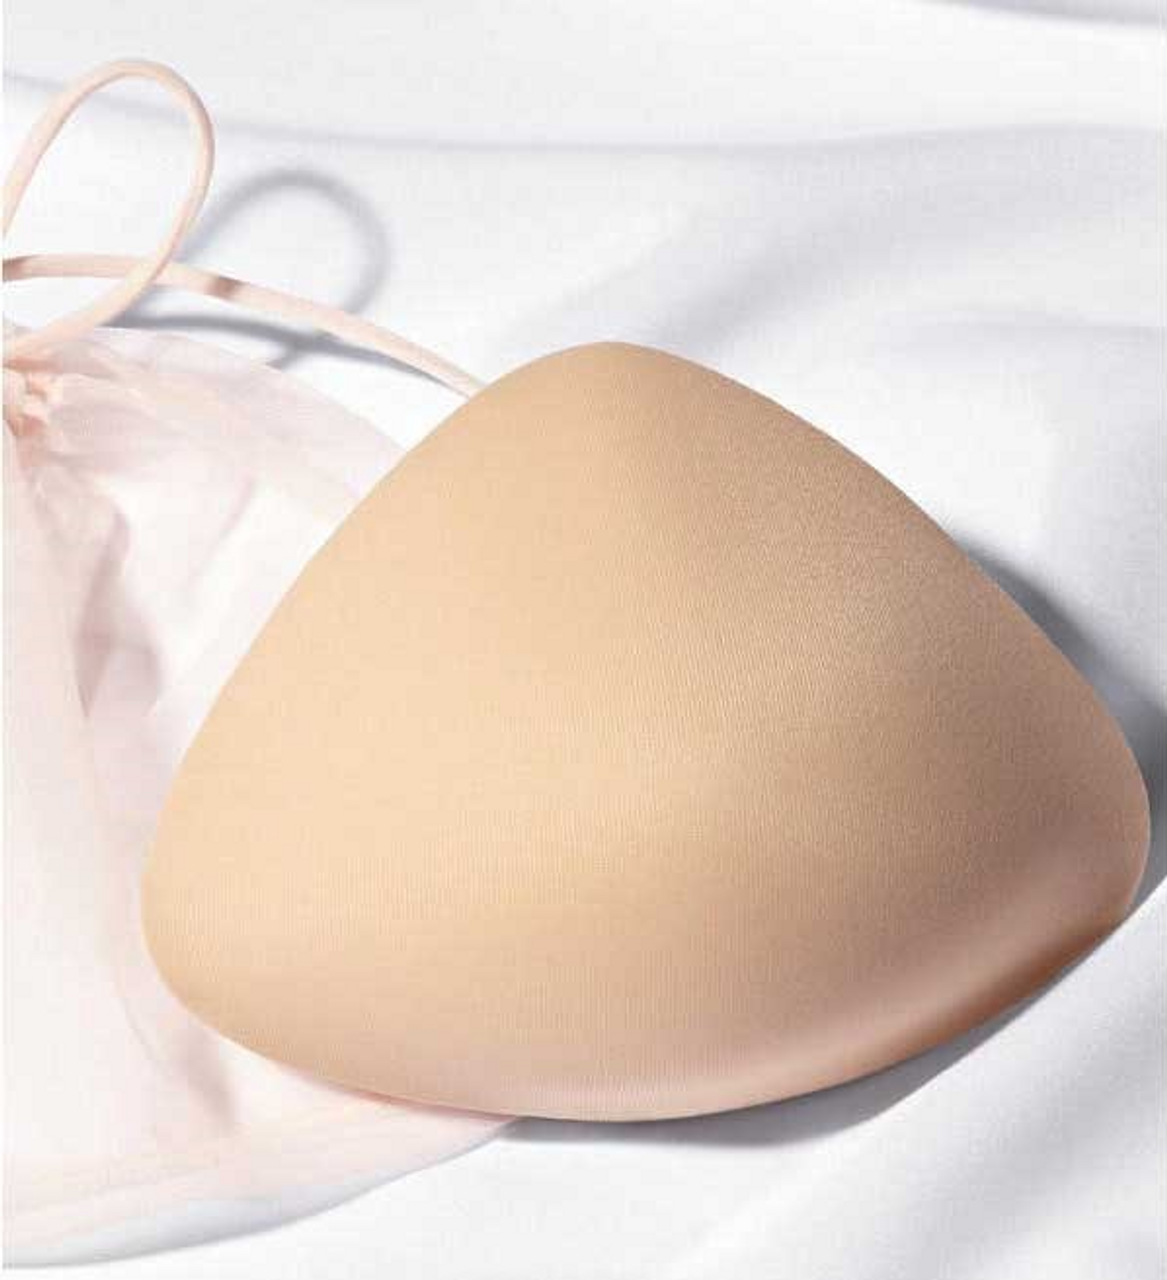 SPLIT SHIPPING Weighted Prosthetic Mastectomy Breast Form Bra Insert 